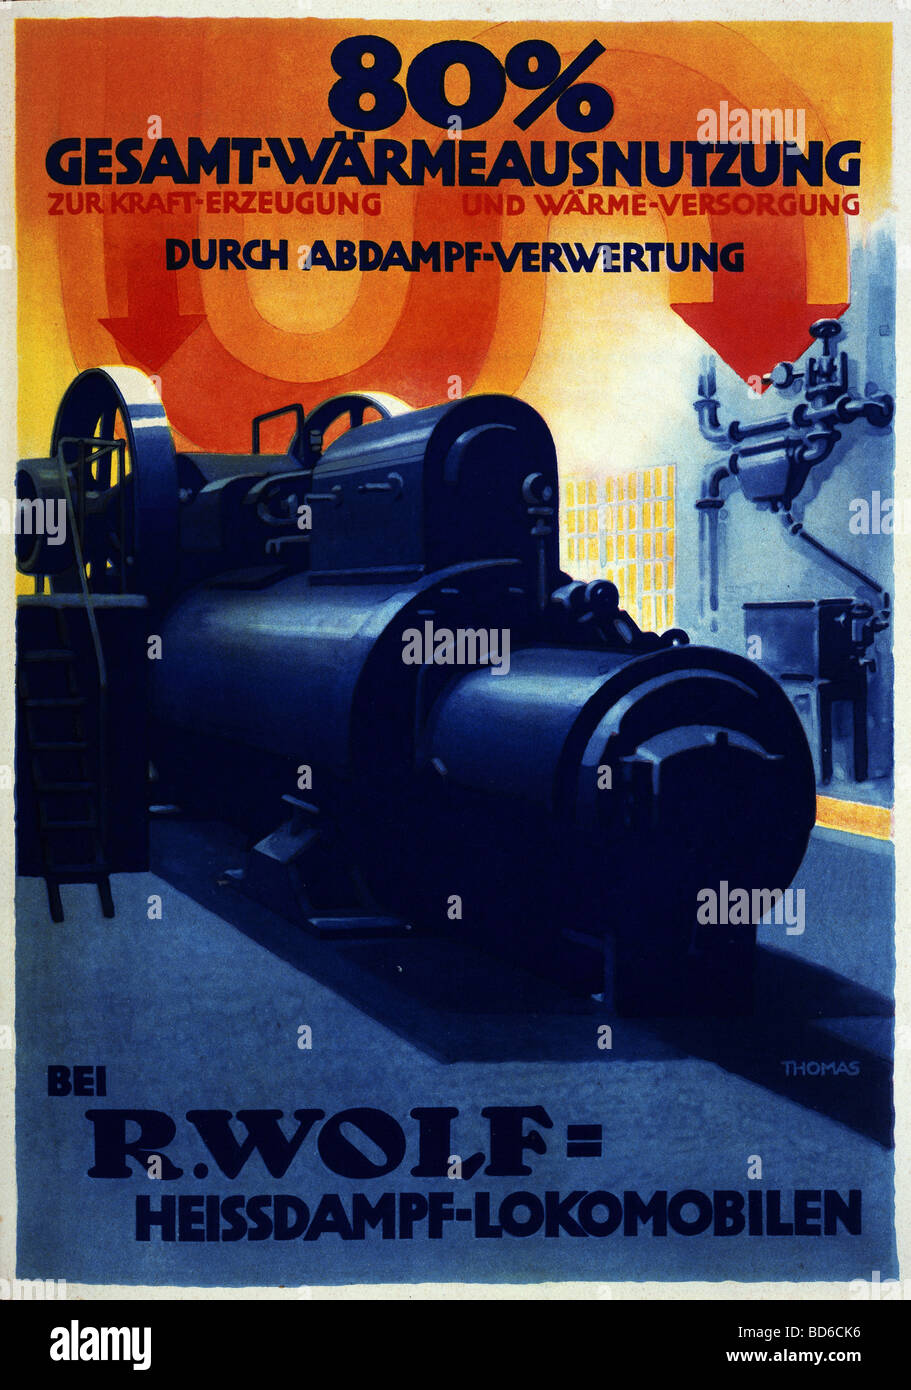 Wolf, Rudolf, 26.7.1831 - 20.11.1910, German industrialist, advertising poster of his steam locomotive company, draft: Bernhard Thomas, printed by Meissner and Buch, Germany, circa 1900, Stock Photo